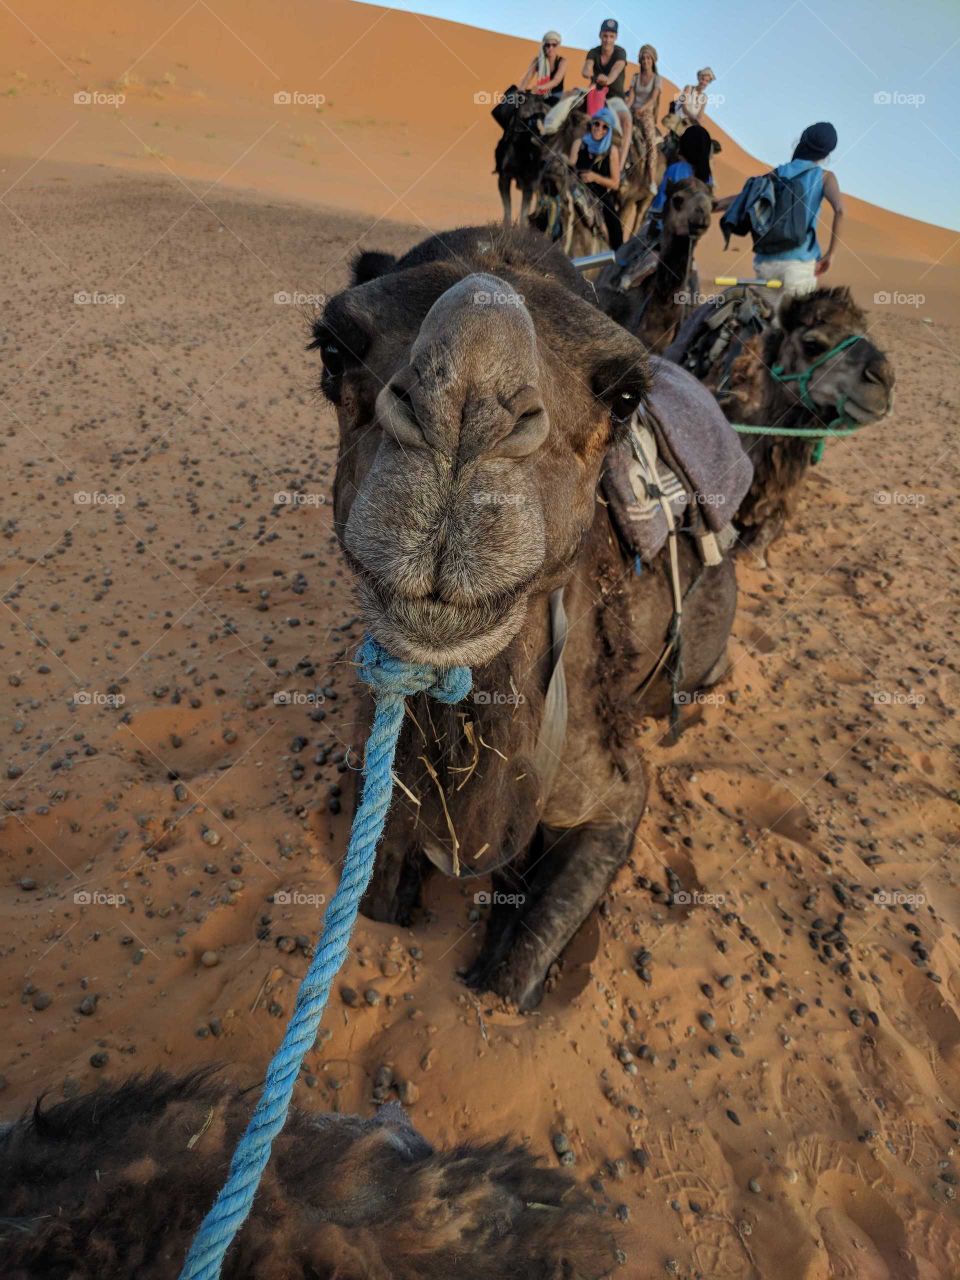 Happy Smiling Camel Lying Down in a Group of Camels and People in the Sahara Desert in Morocco